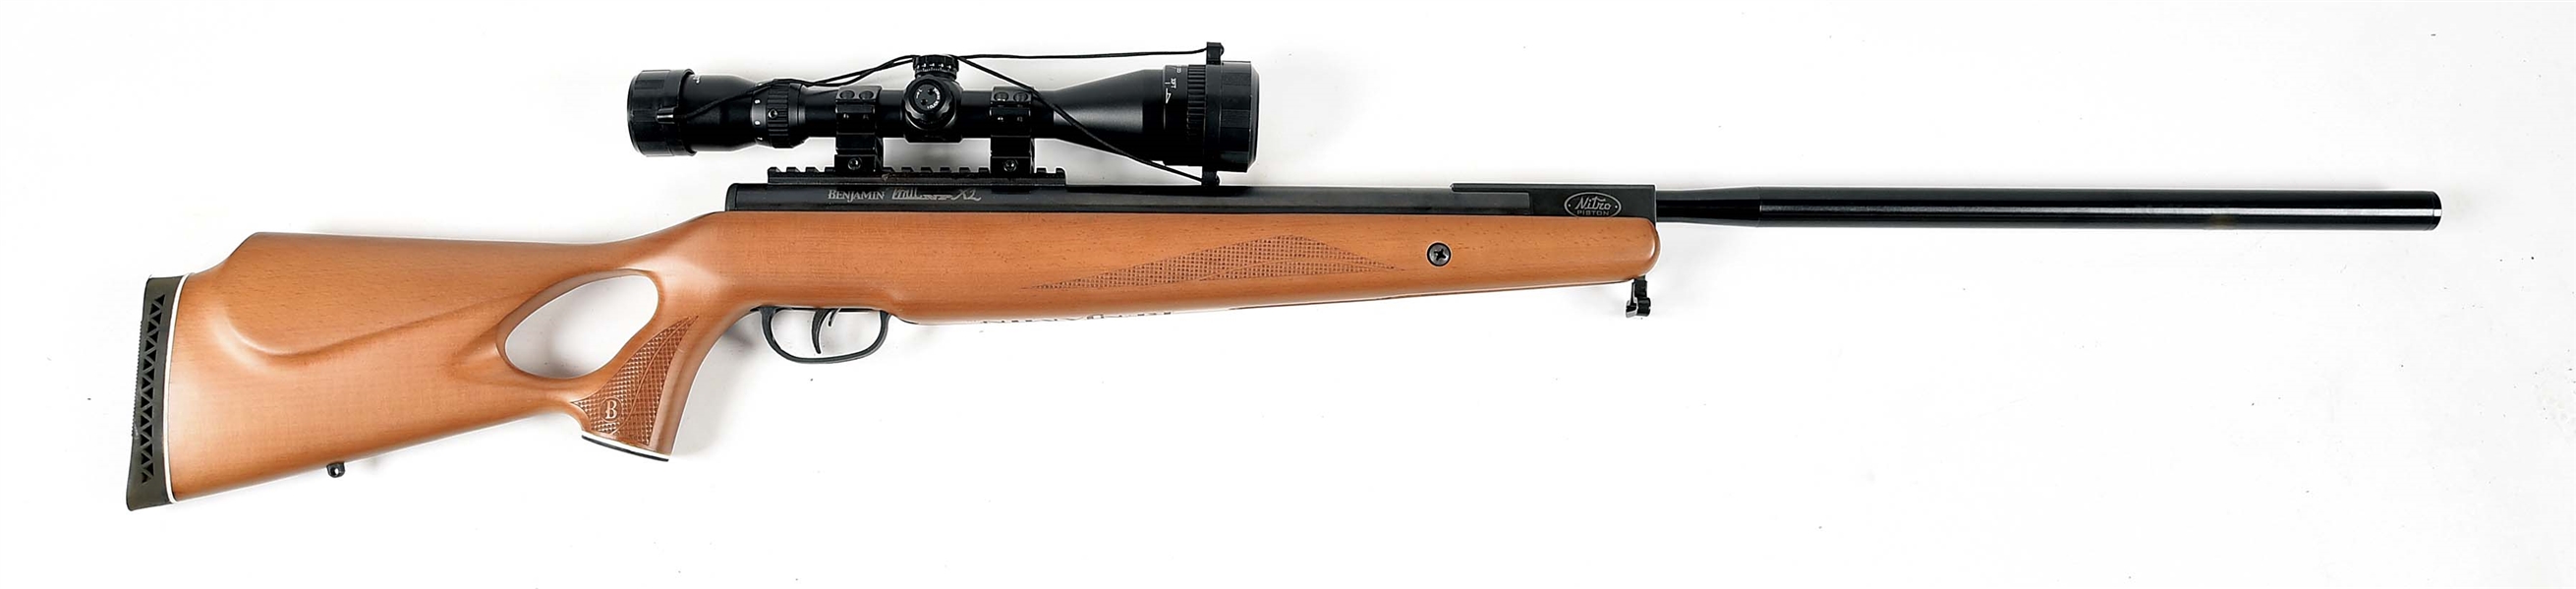 BENJAMIN TRAIL NP XL .25 AIR RIFLE WITH SCOPE.